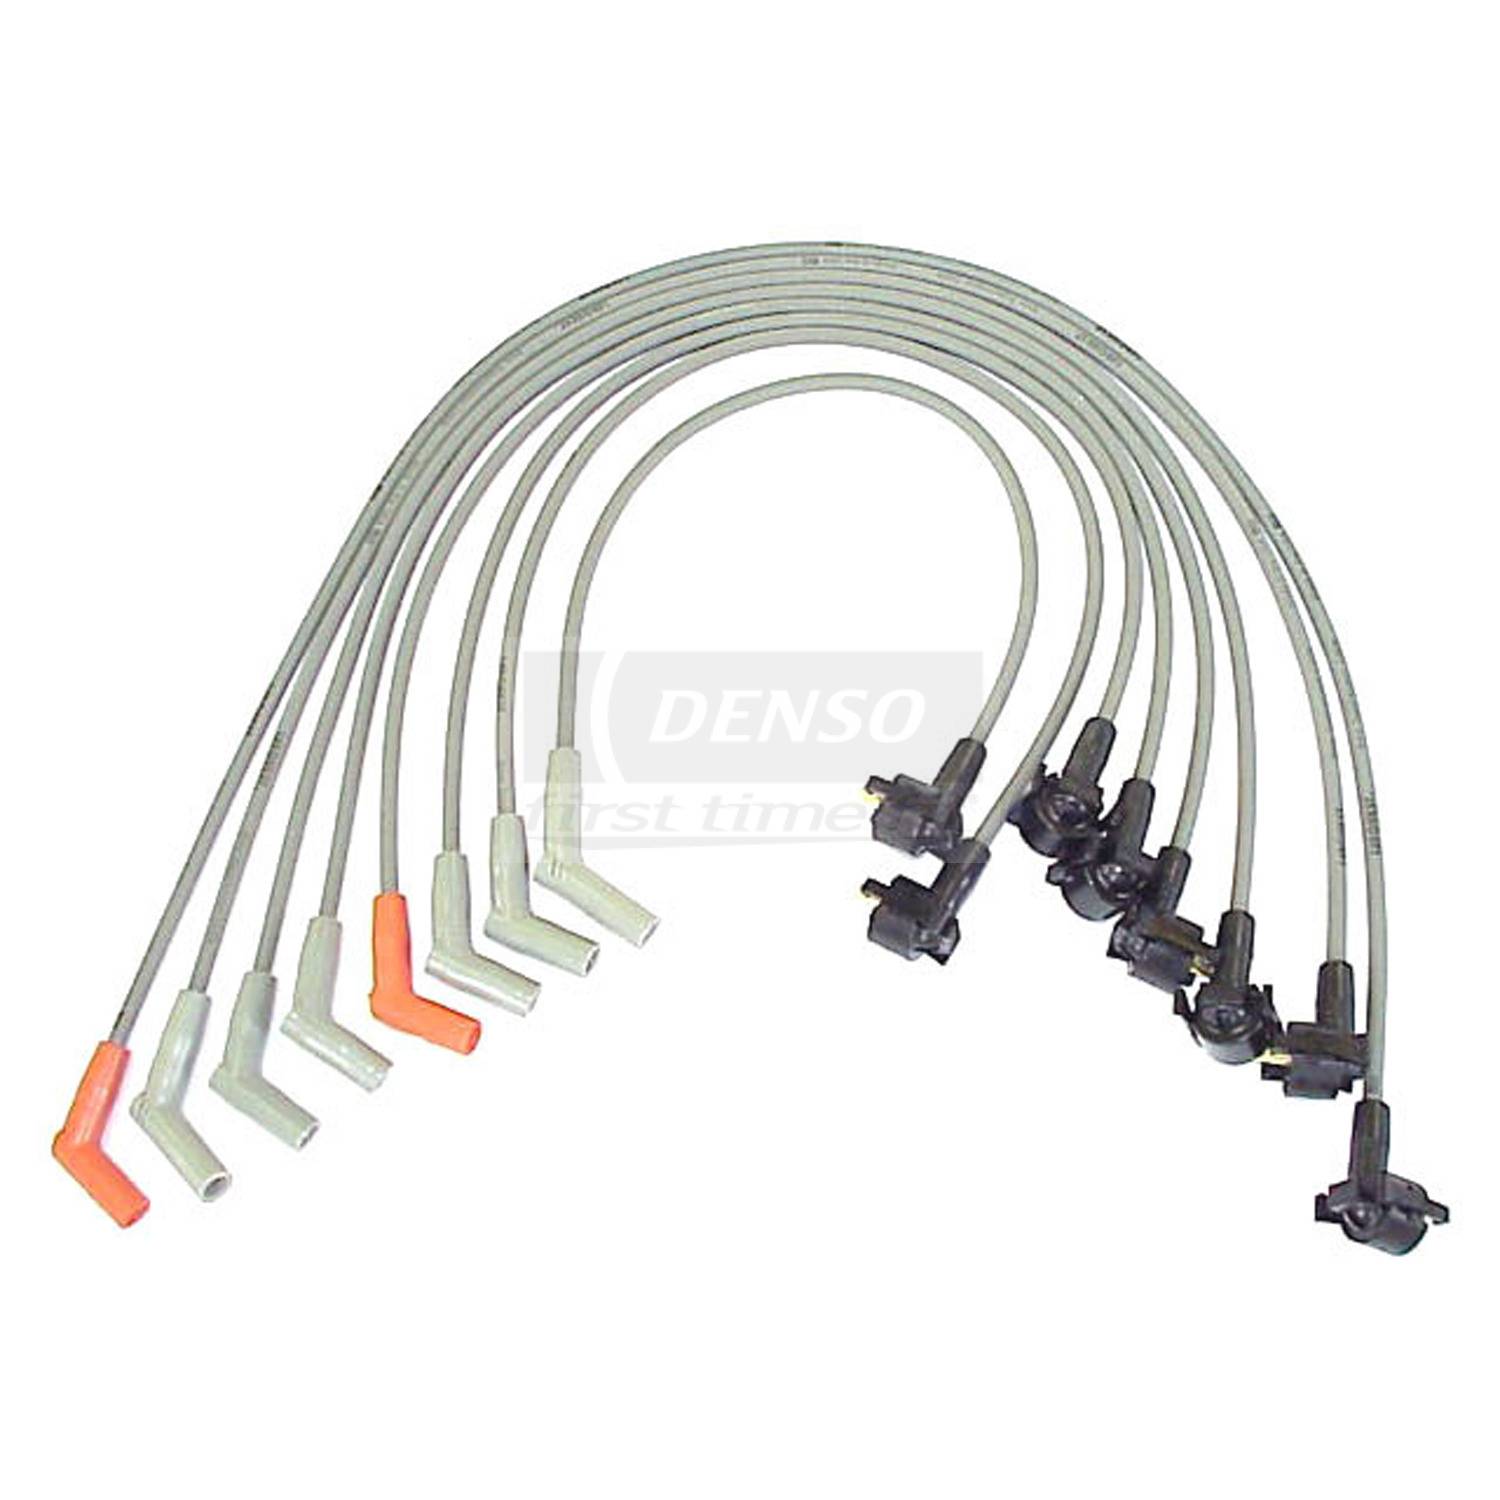 Denso 671-8093 Original Equipment Replacement Wires 